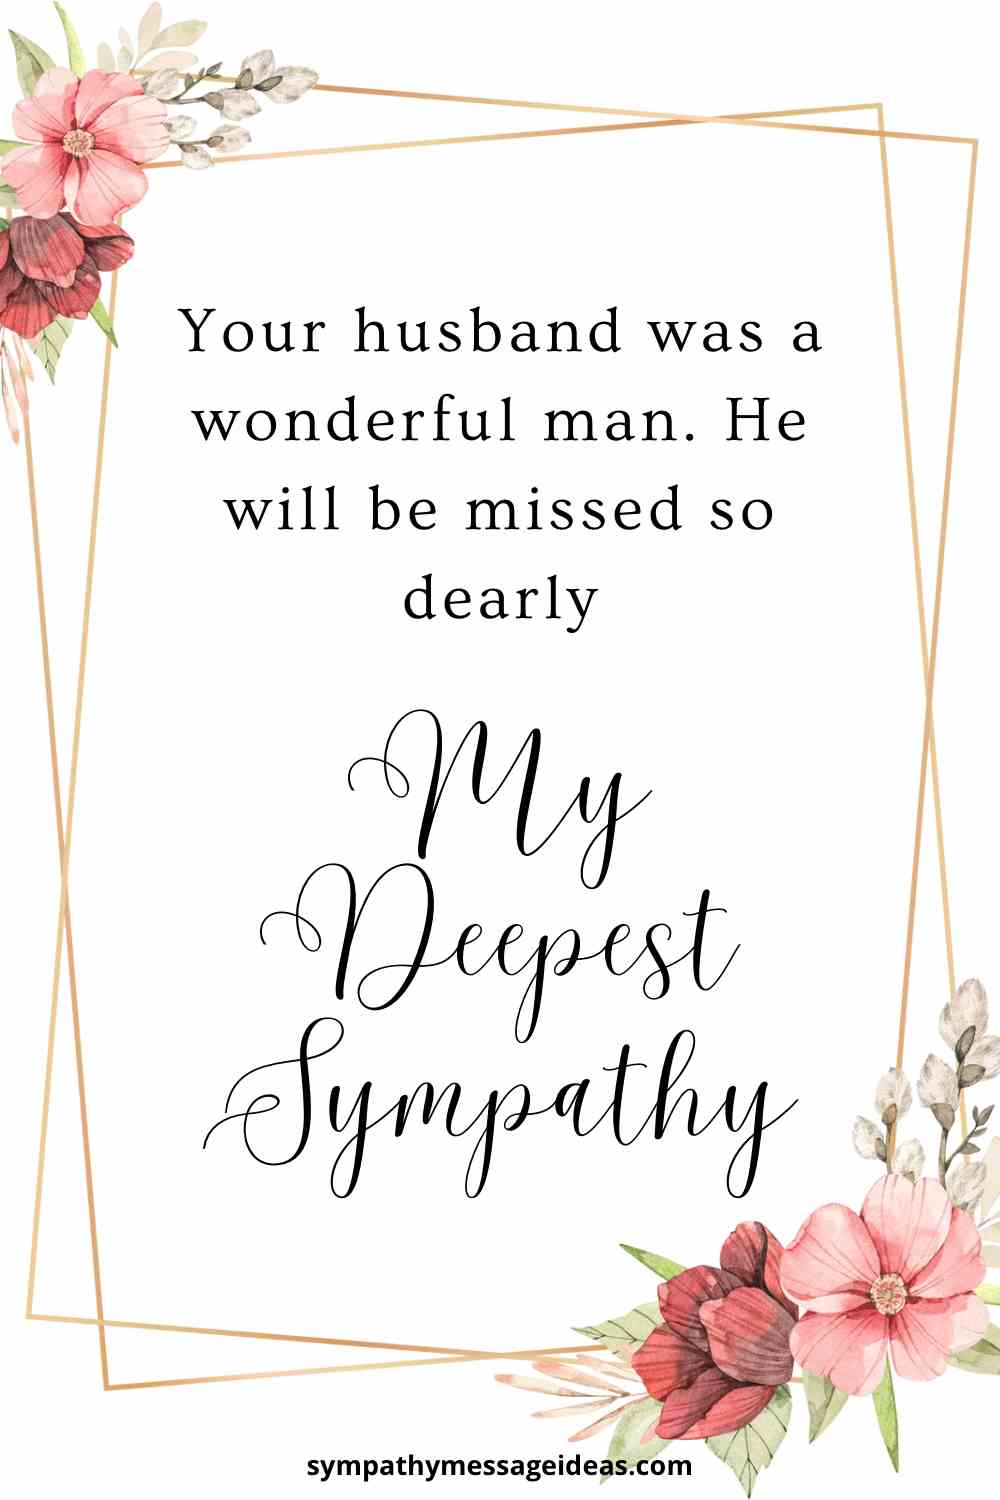 sympathy message for the loss of husband